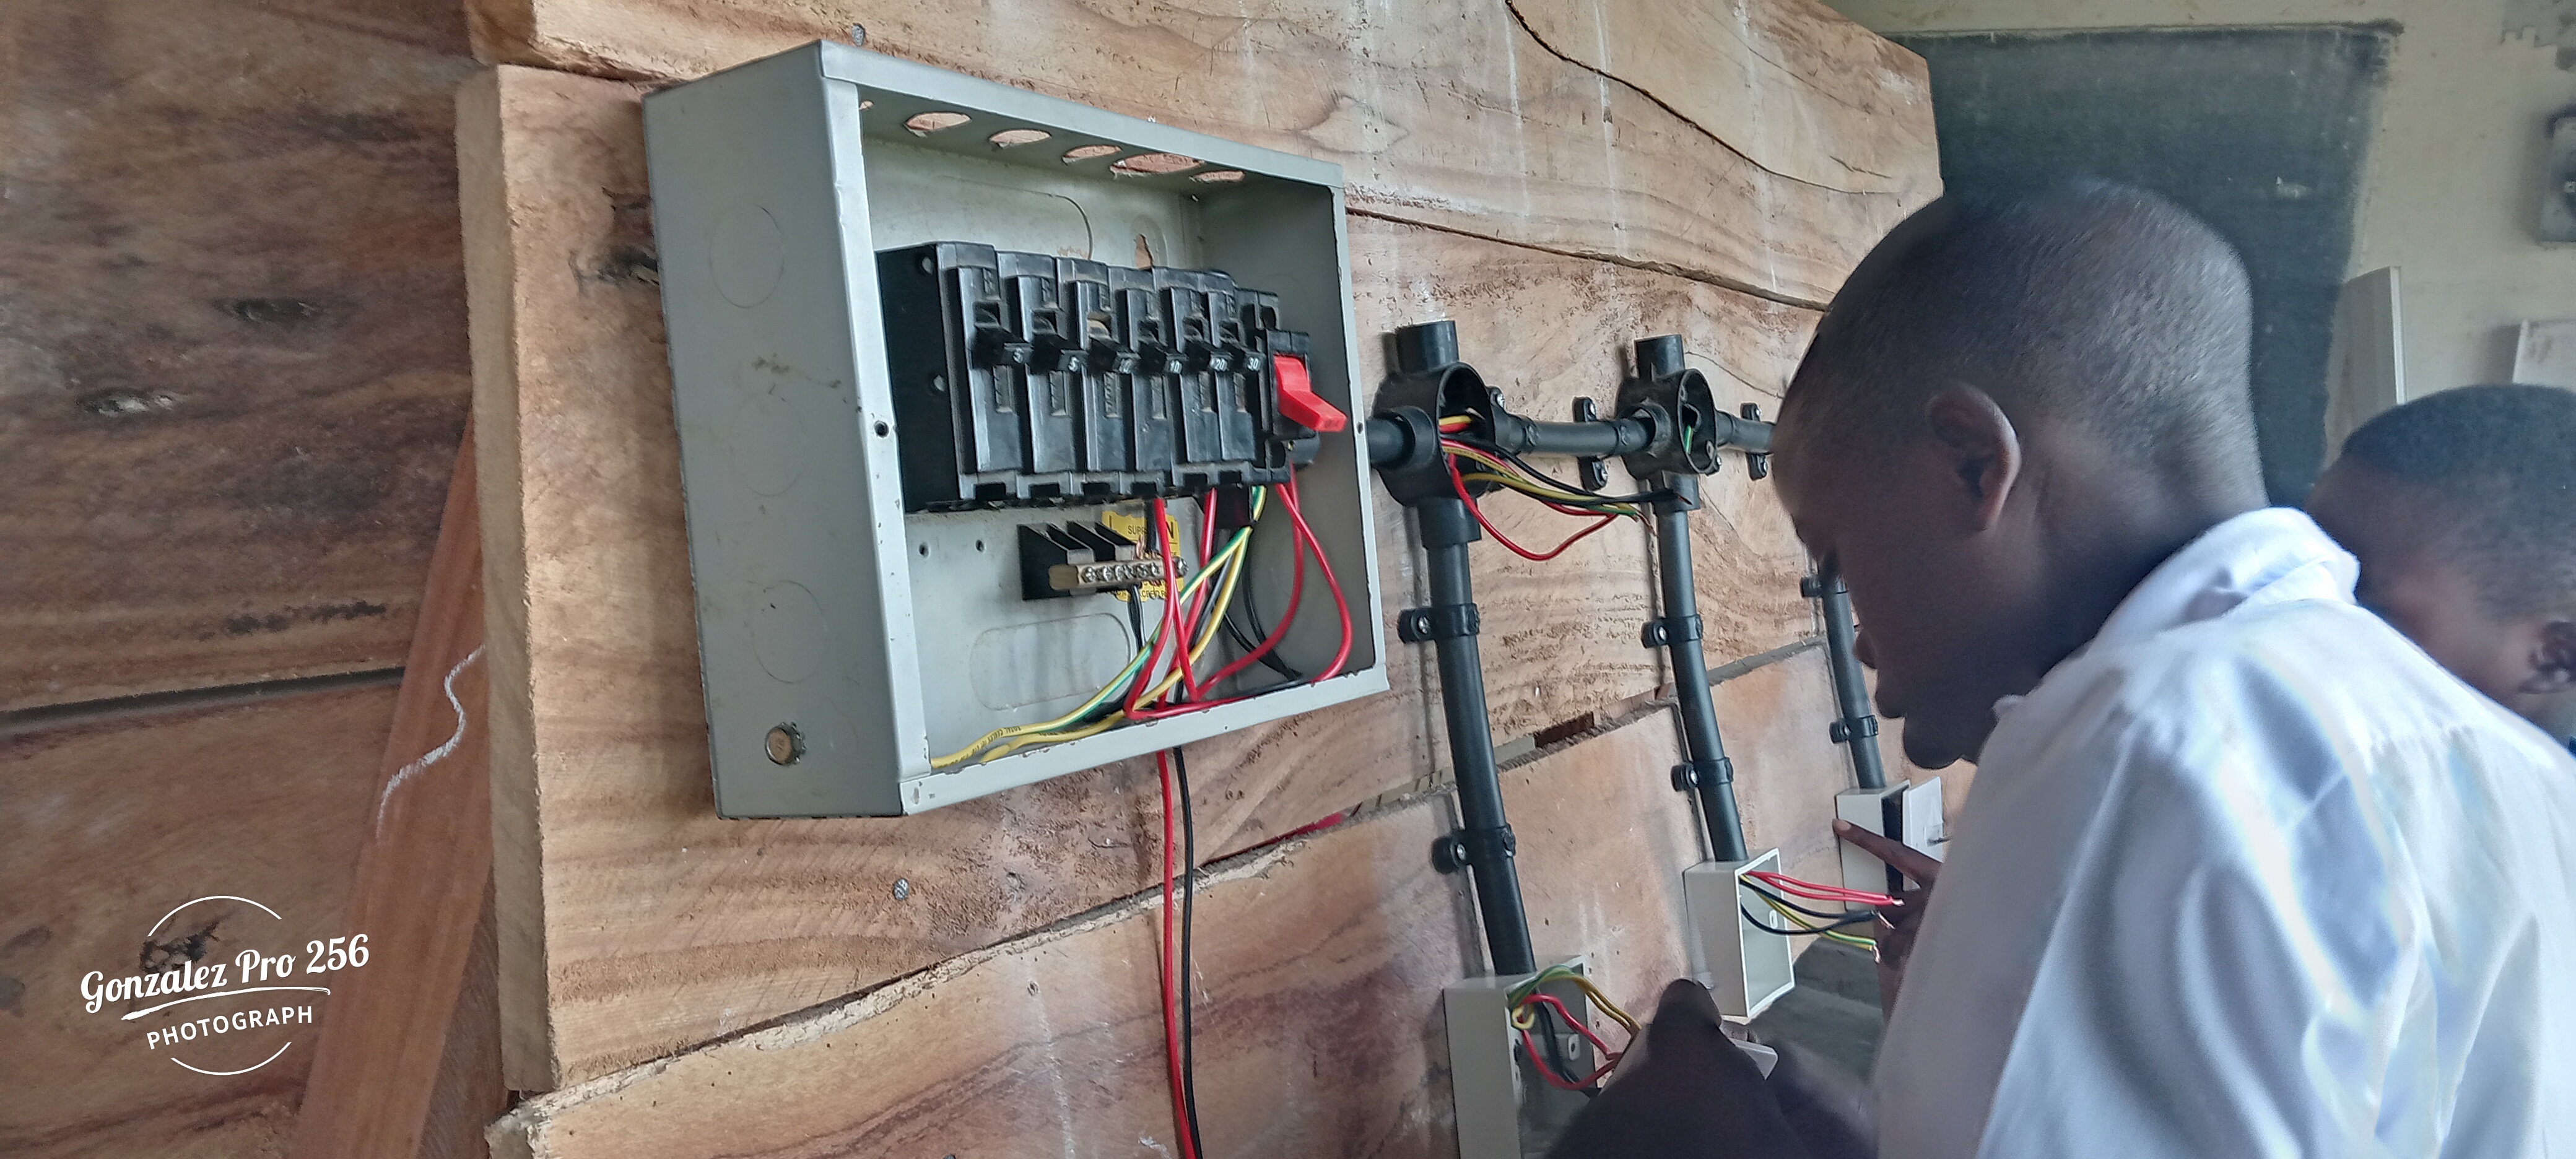 ELECTRICAL INSTALLATION PRACTICE